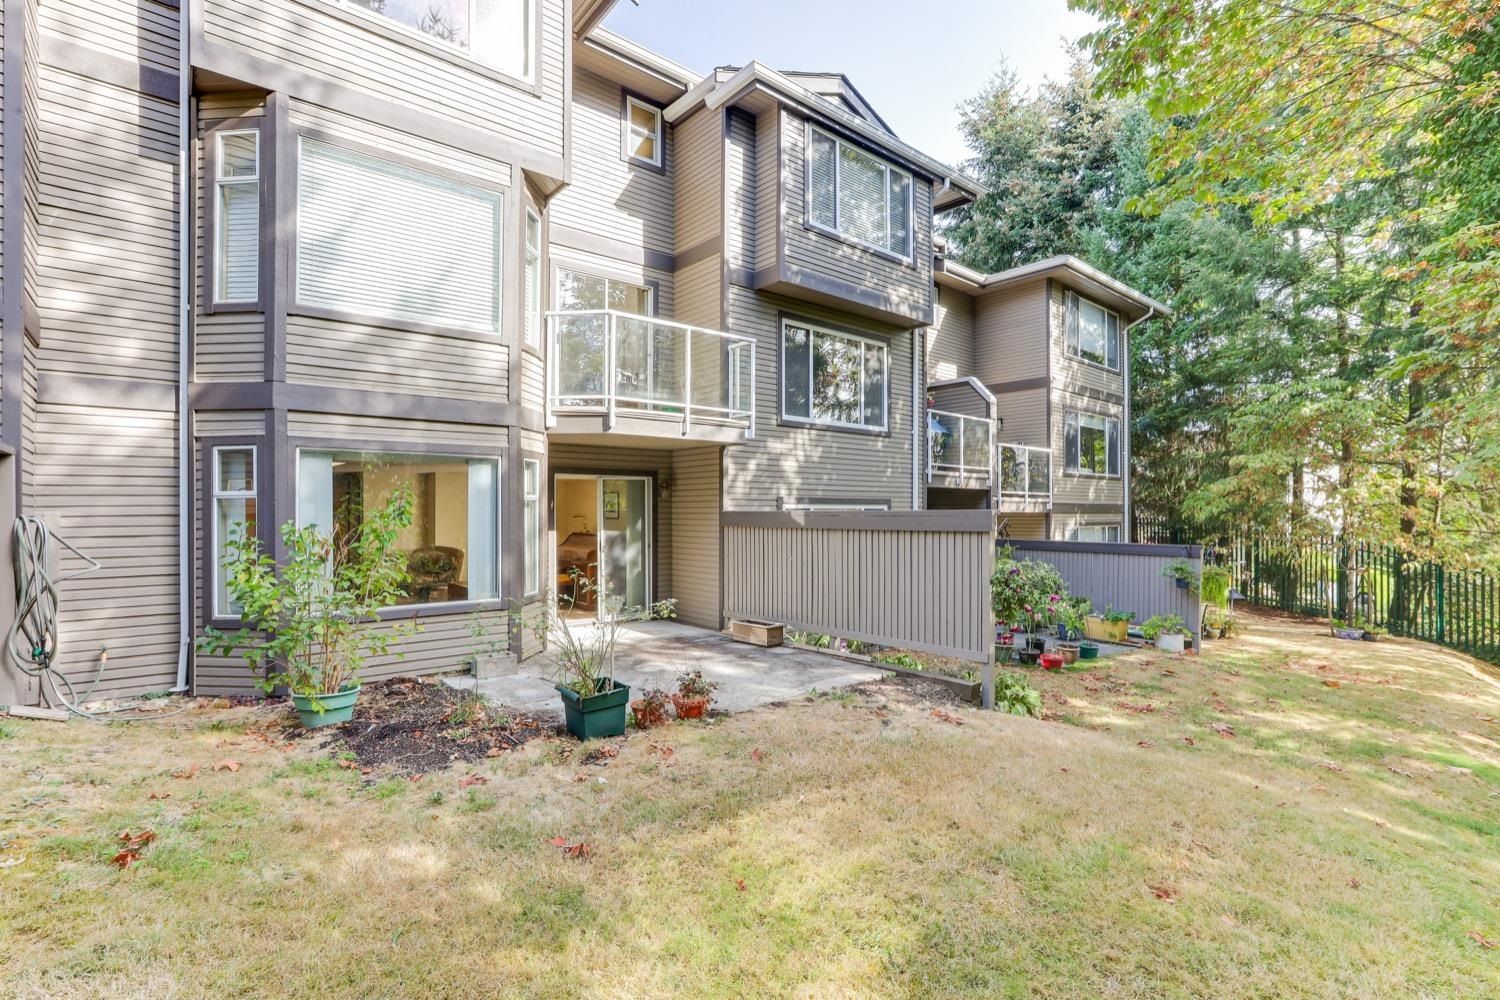 We have just listed a property in Citadel PQ, Port Coquitlam